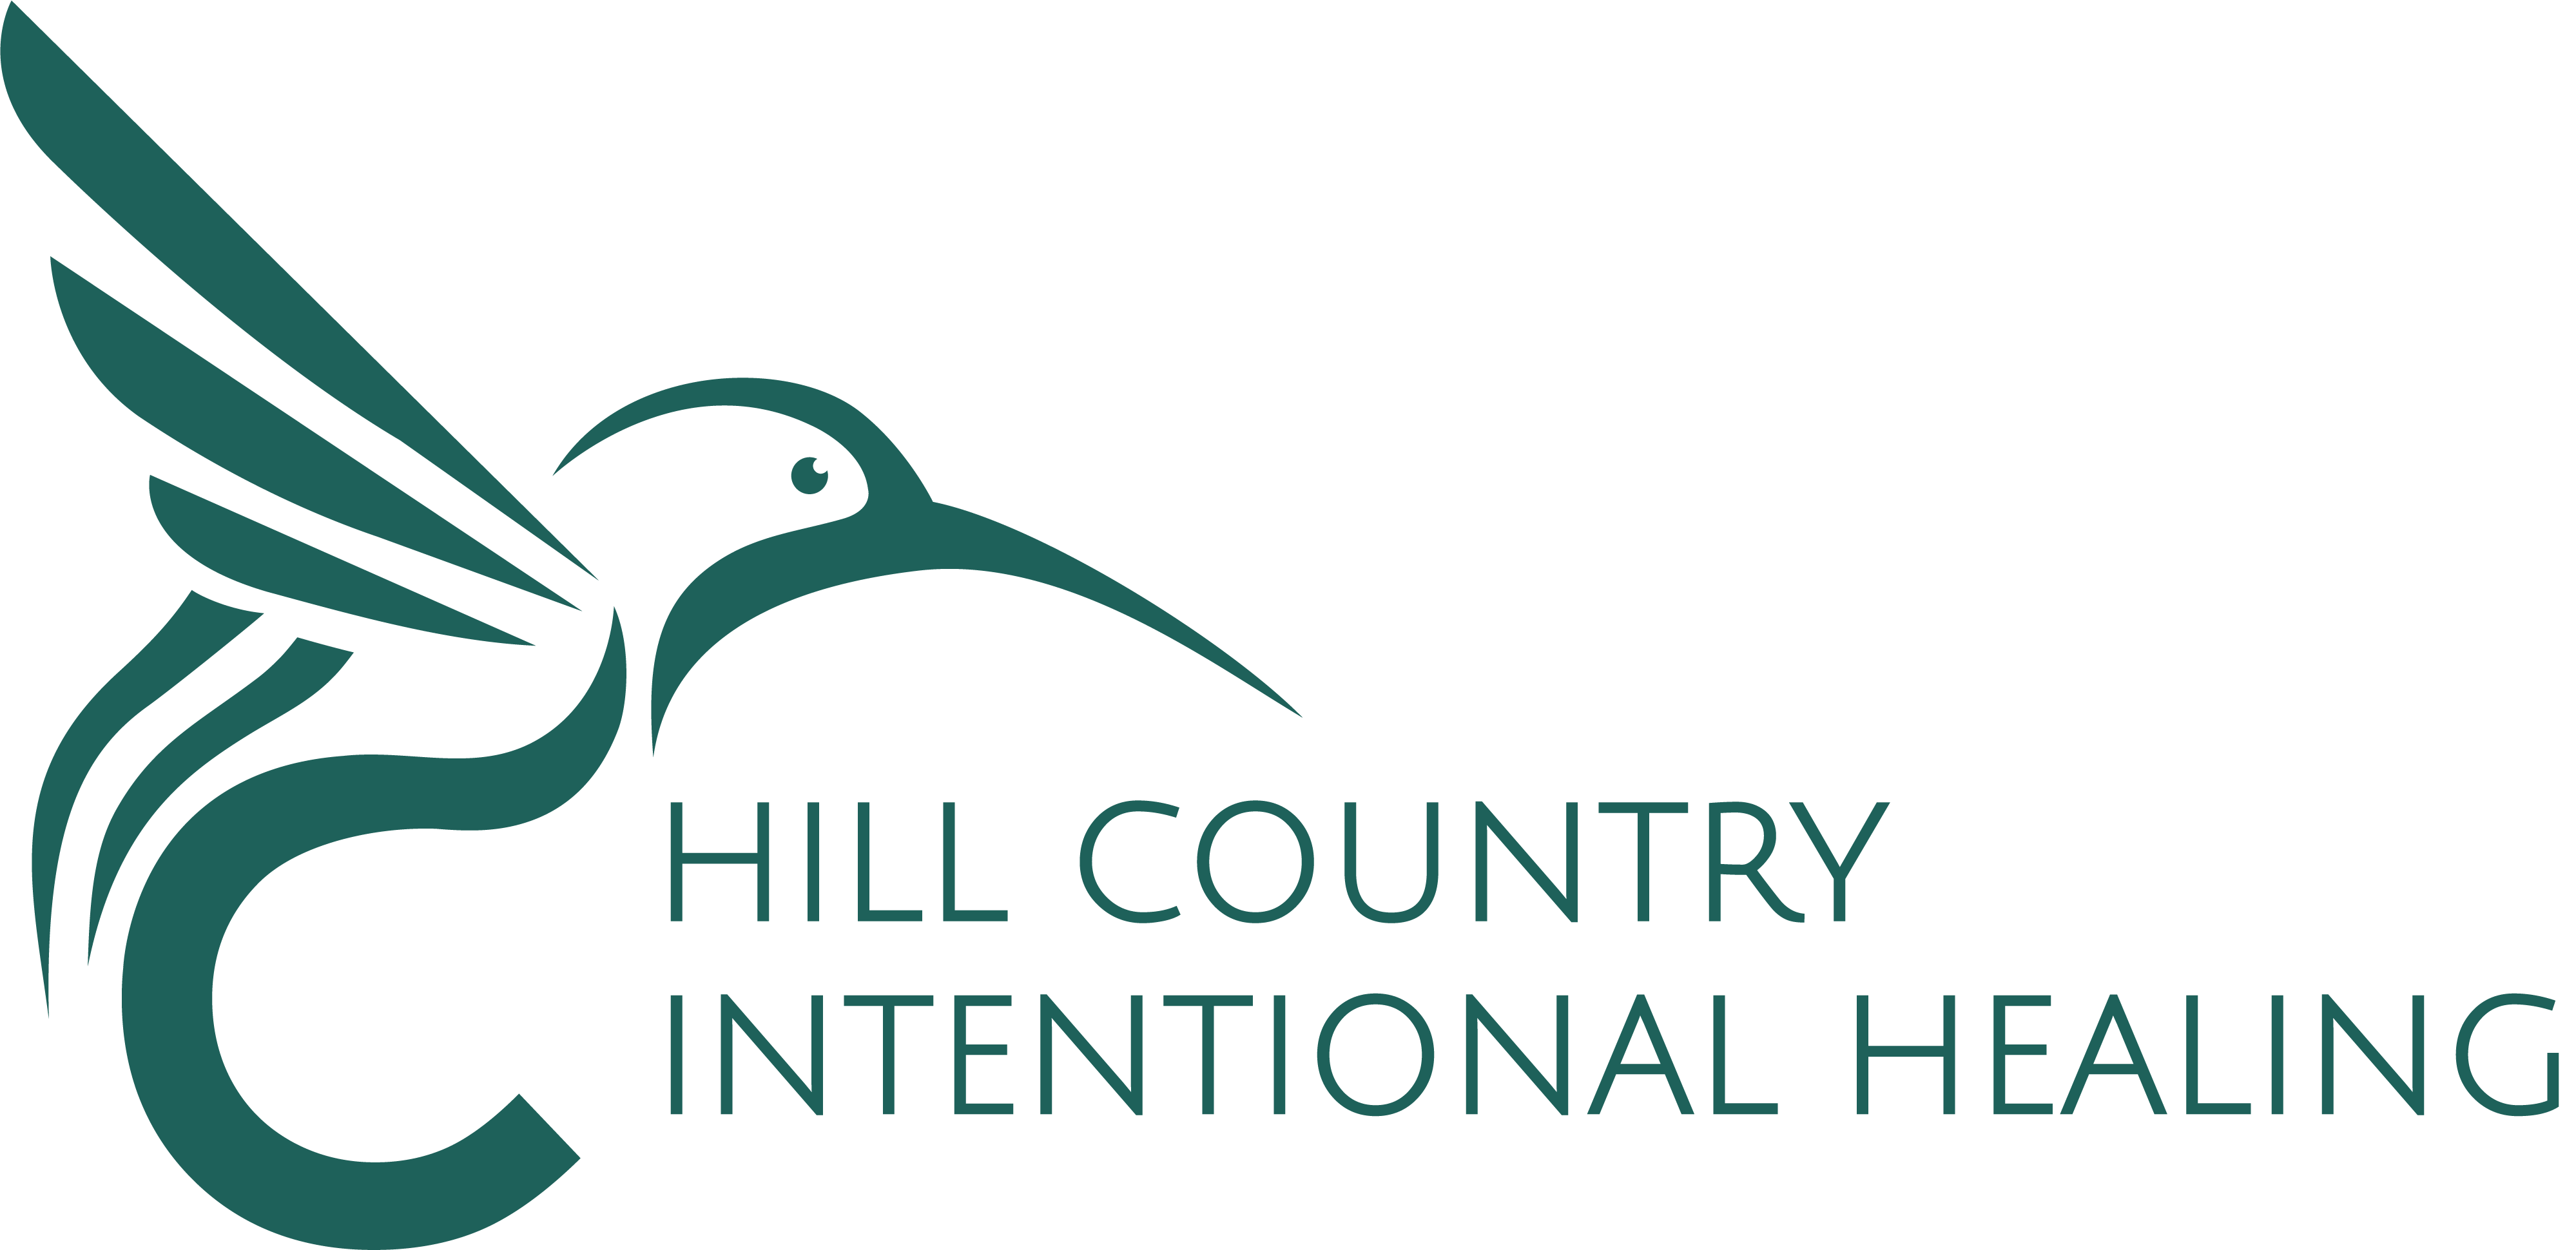 Hill Country Intentional Healing